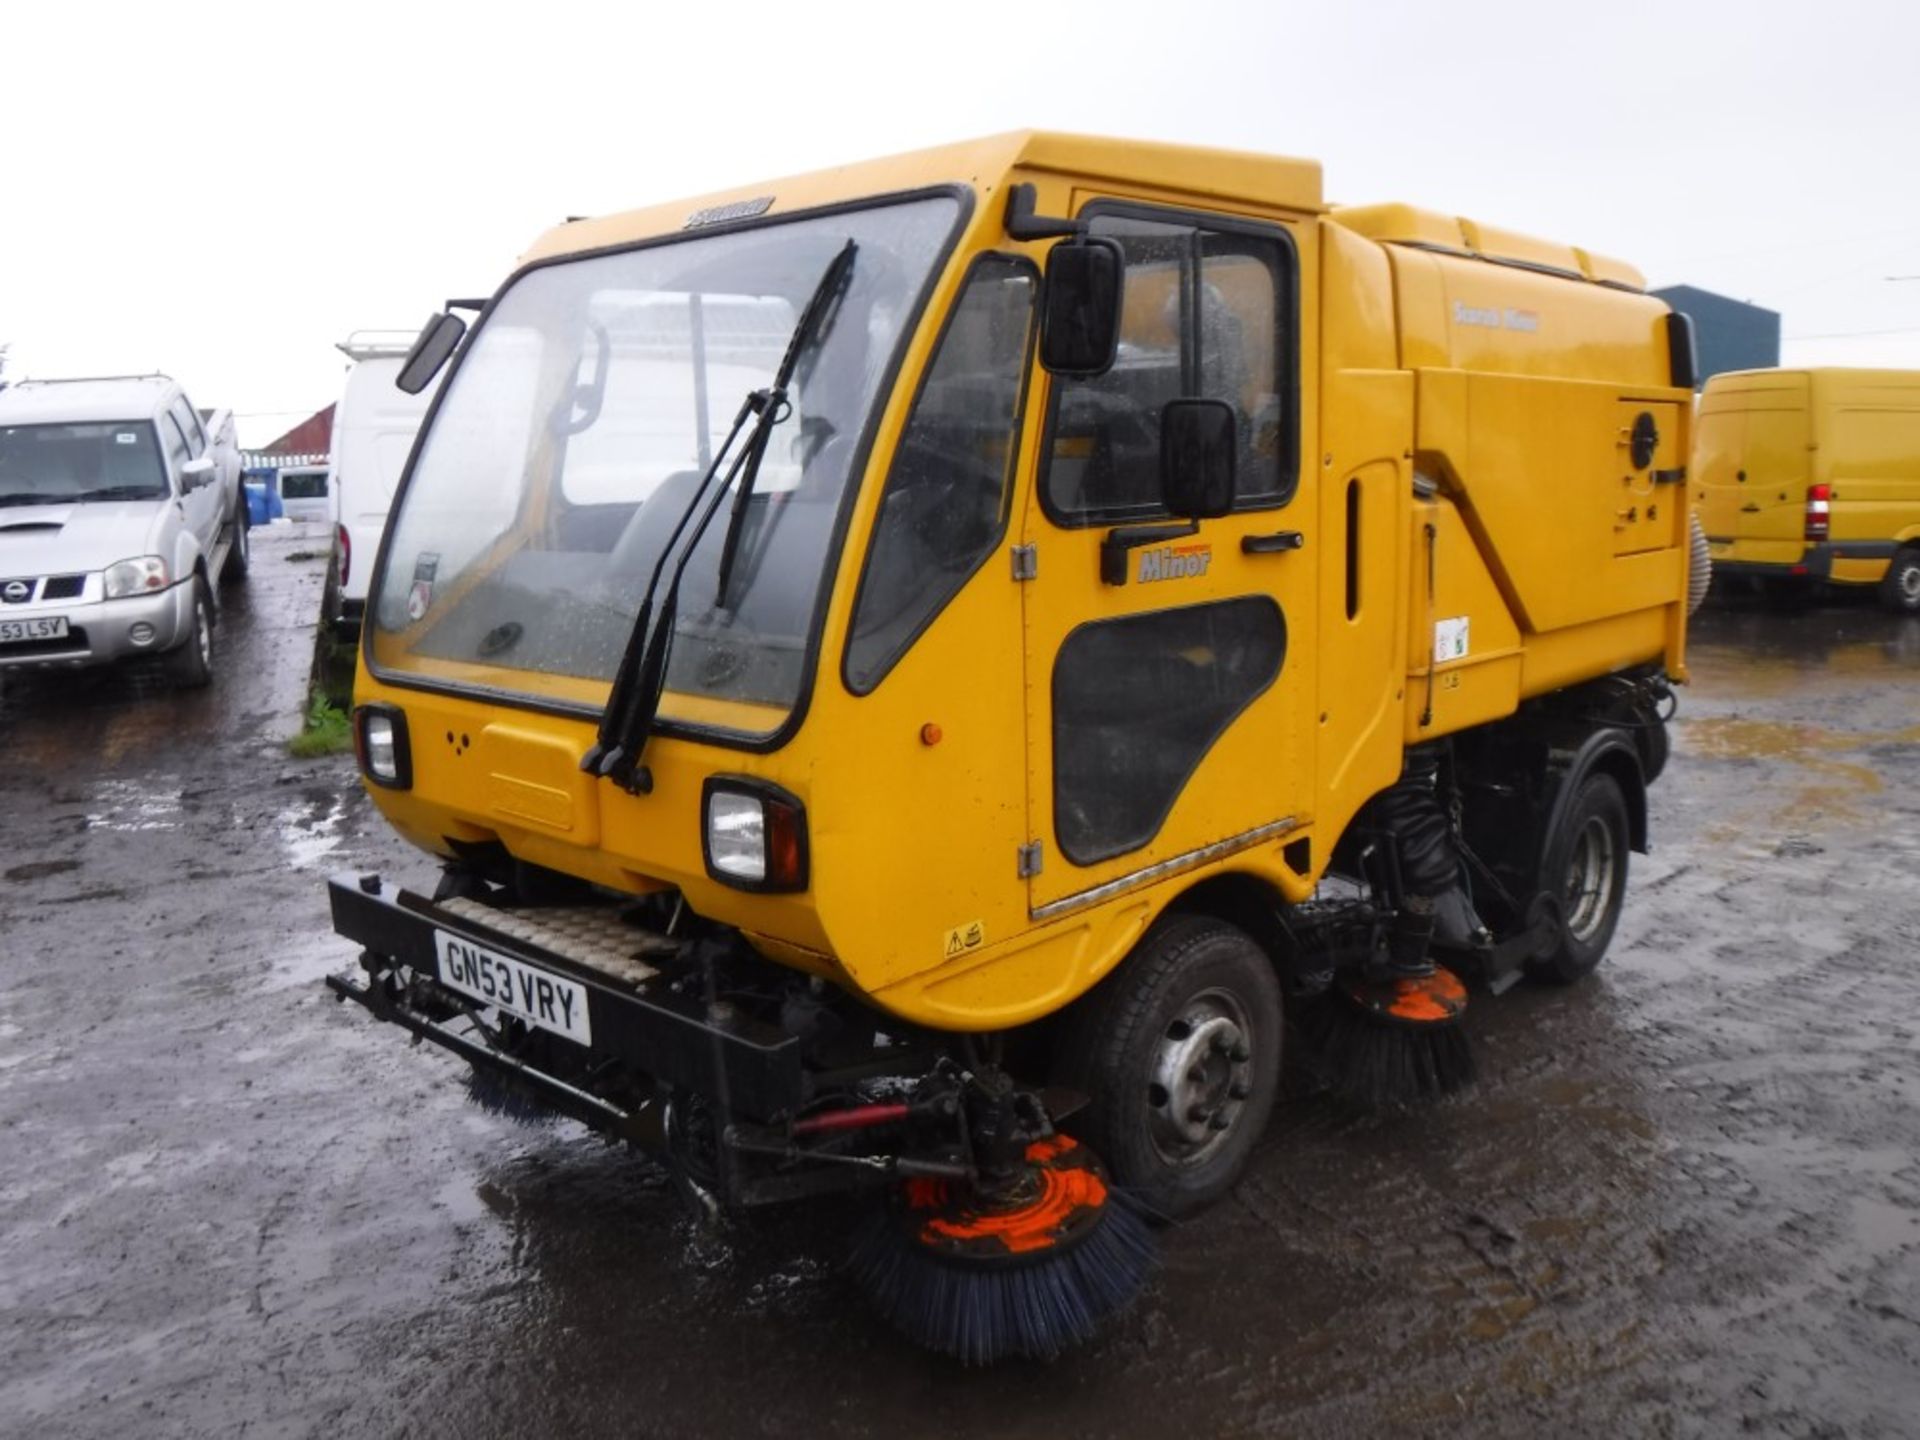 03 reg SCARAB 3.5 SWEEPER, 1ST REG 11/03, 2955 HOURS NOT WARRANTED, V5 HERE, 1 OWNER FROM NEW [